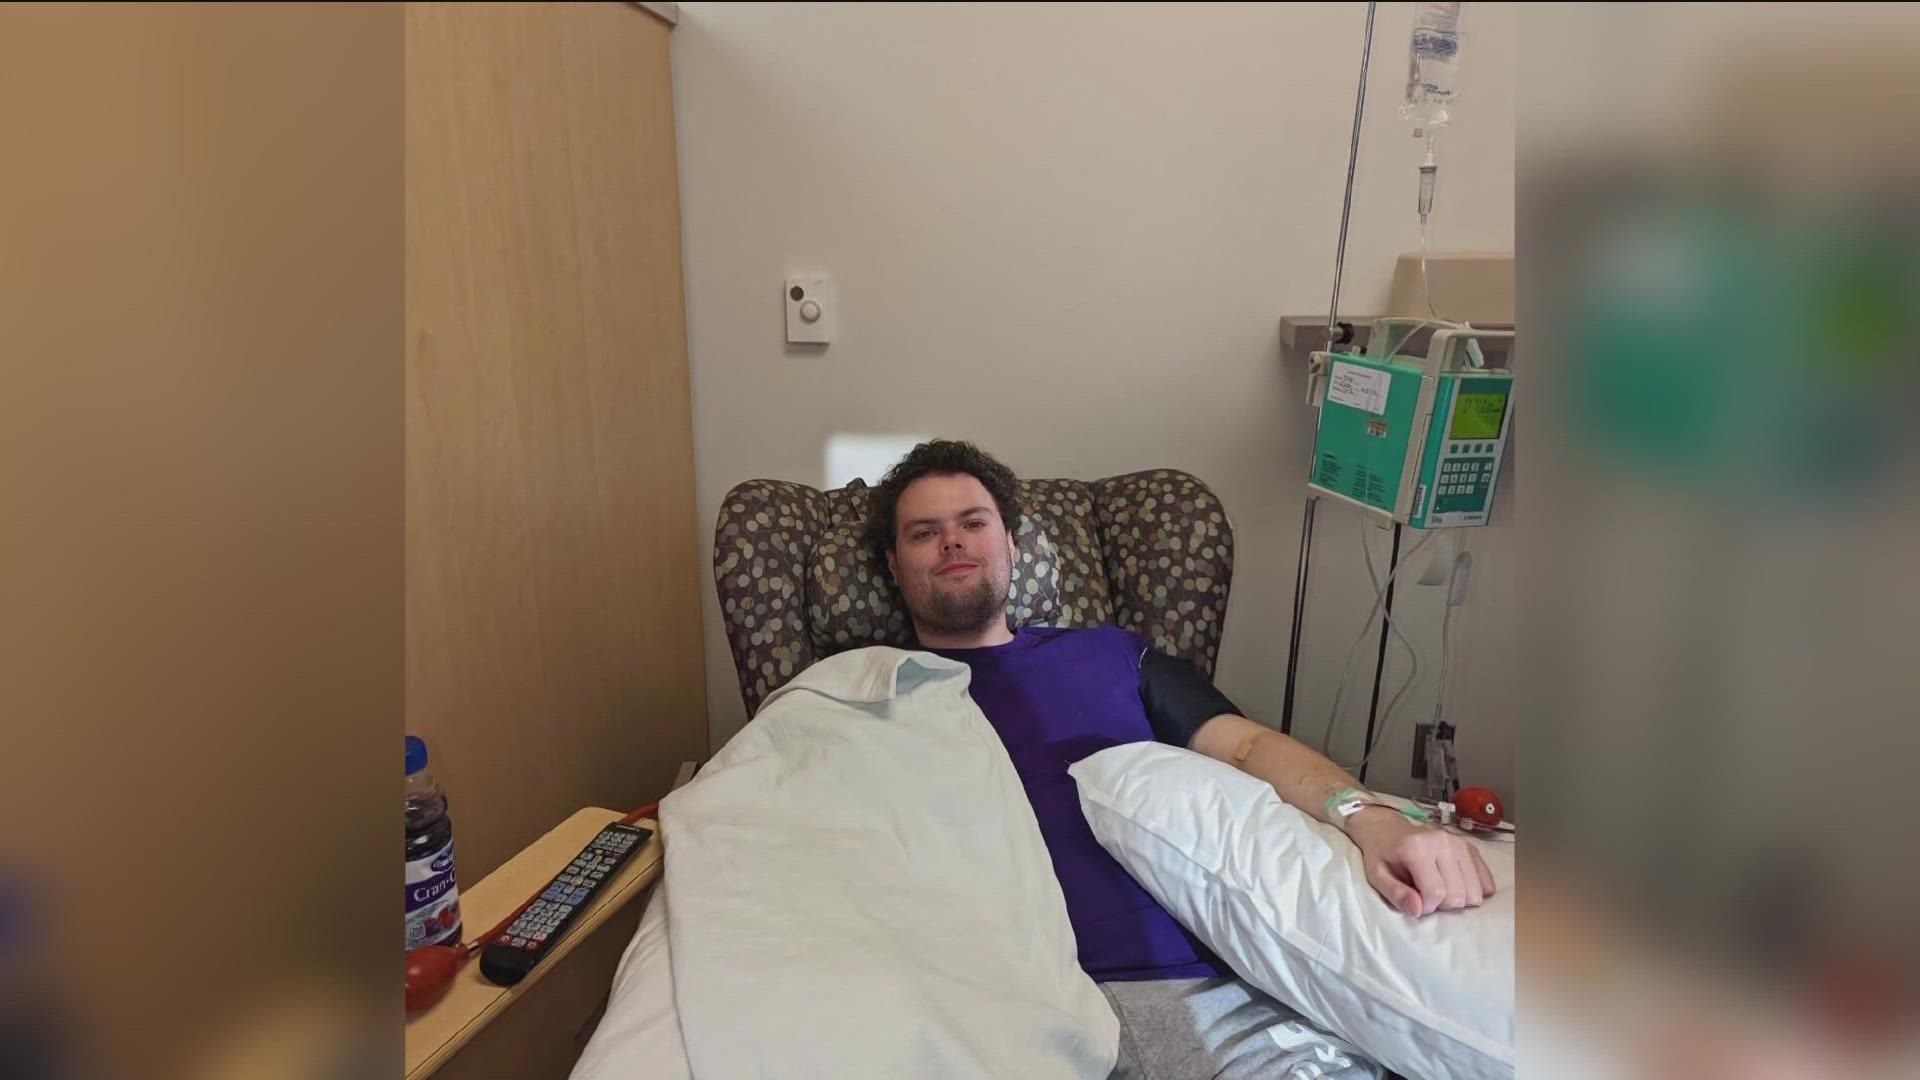 Dylan Coleman, a senior at Bowling Green State University, was inspired to donate after watching a TikTok video.